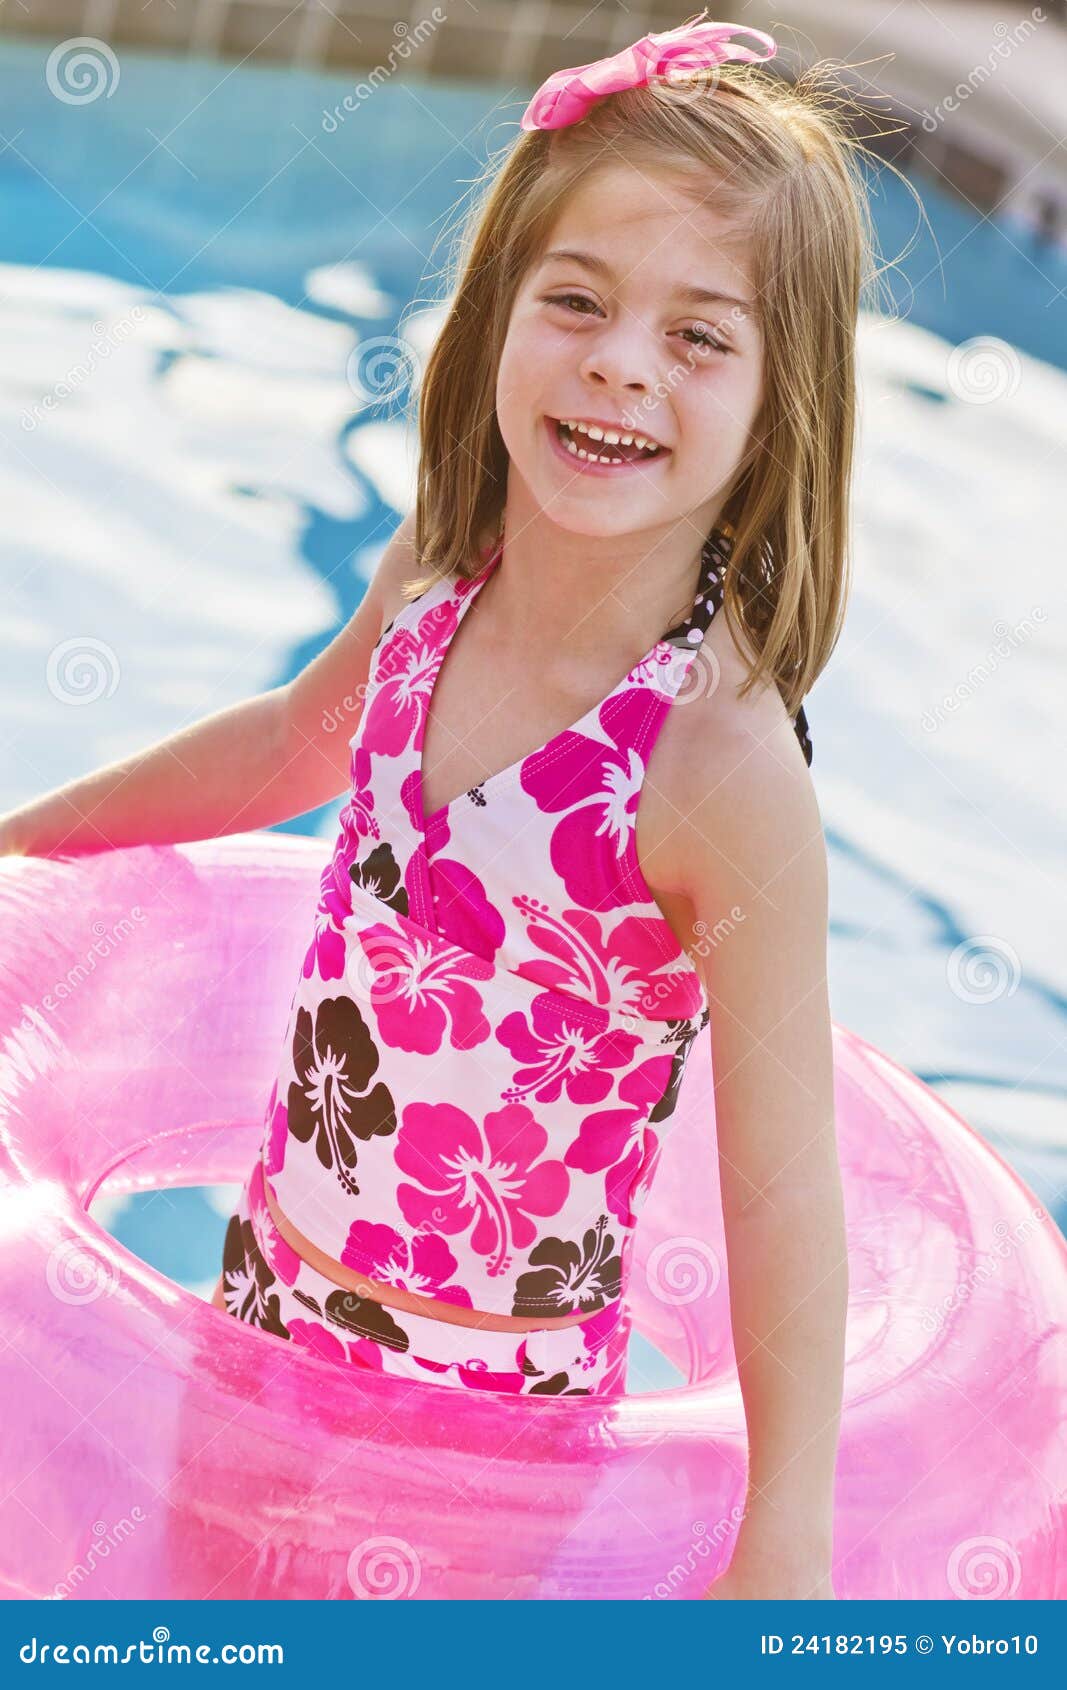 Having Fun at the Swimming Pool Stock Image - Image of outdoors, girl ...